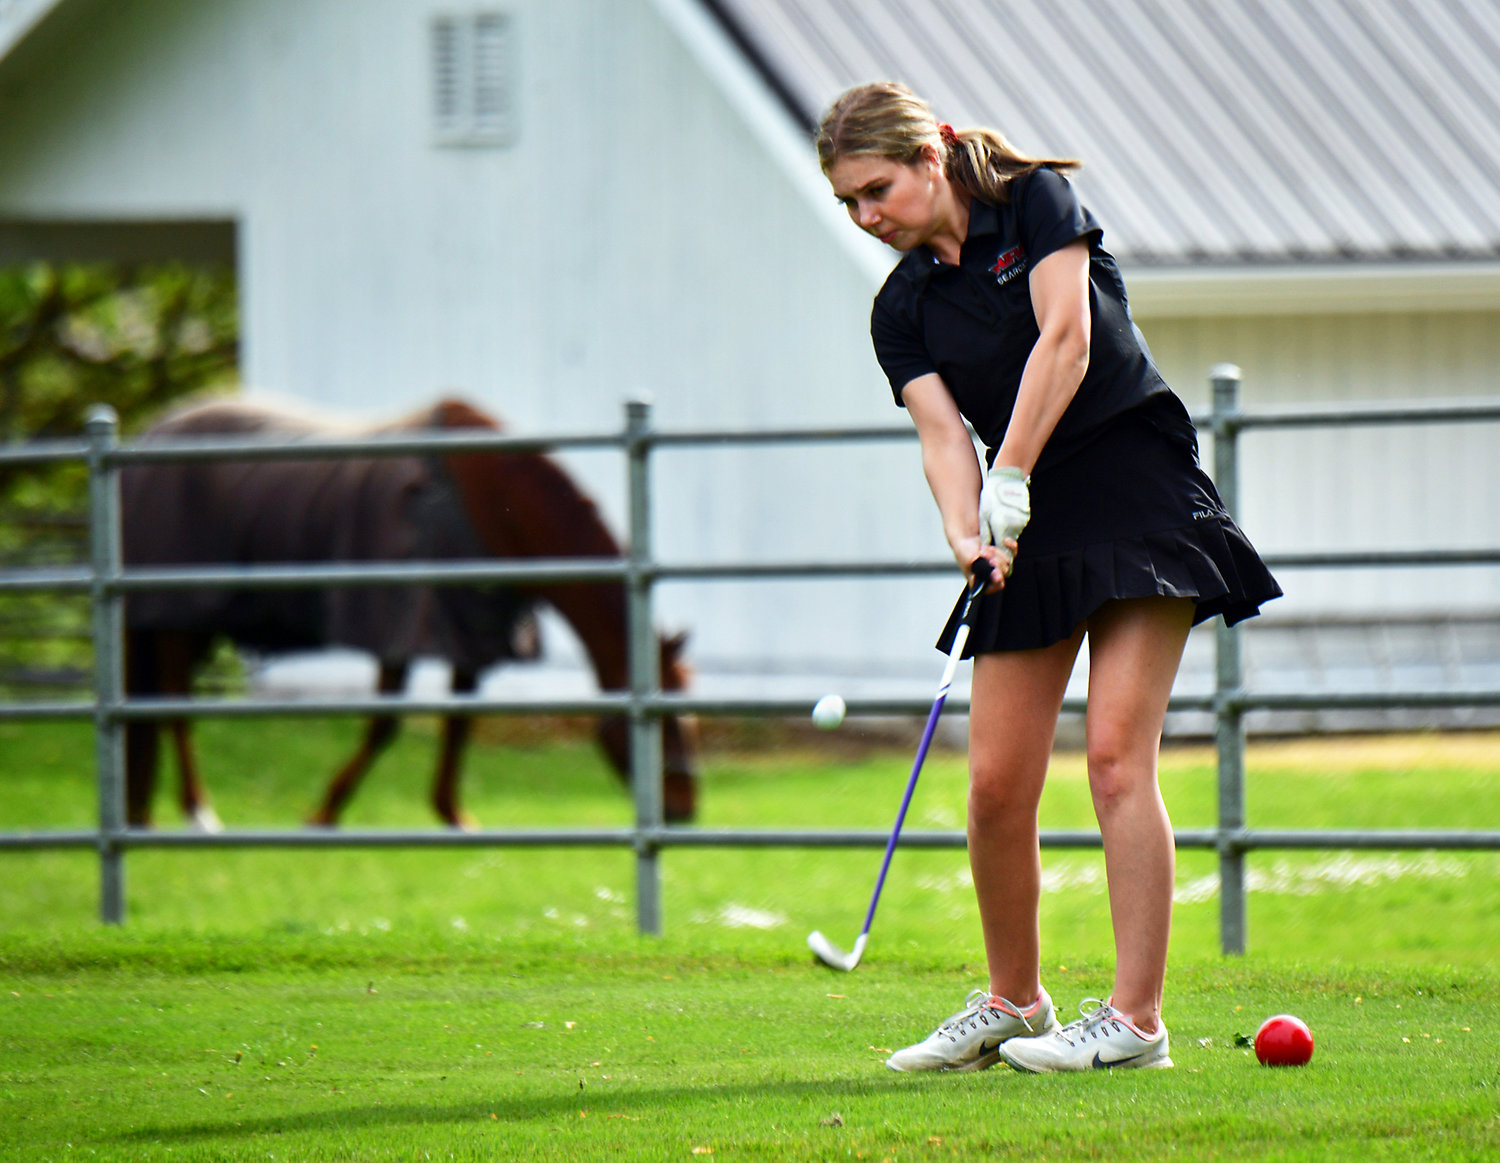 FILE PHOTO - W.F. West High School golfer Laney Barker hits from the tee on Hole No. 22 Wednesday, April 28, at Newaukum Valley Golf Course in Chehalis. W.F. West hosted Rochester High School in the two-team match.